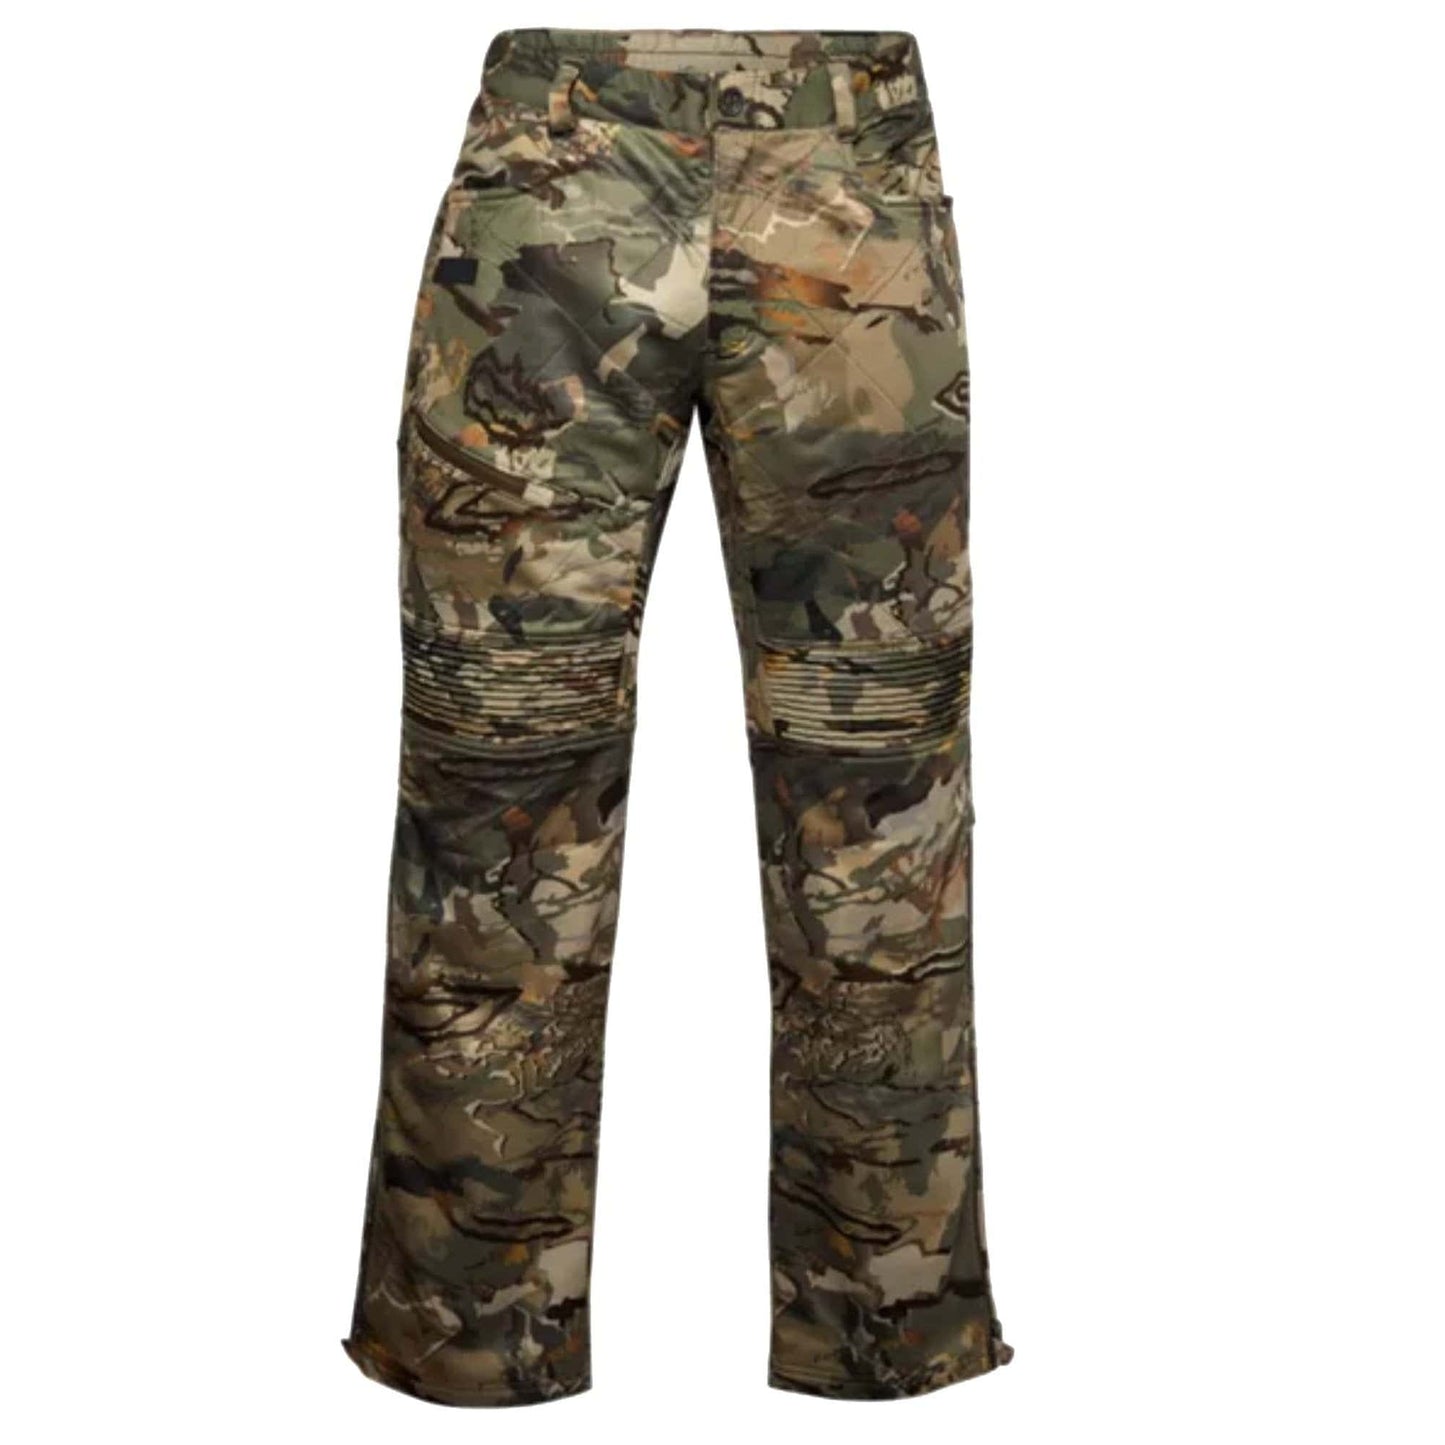 Under Armour Brow Tine ColdGear Infrared Pants by Texas Fowlers